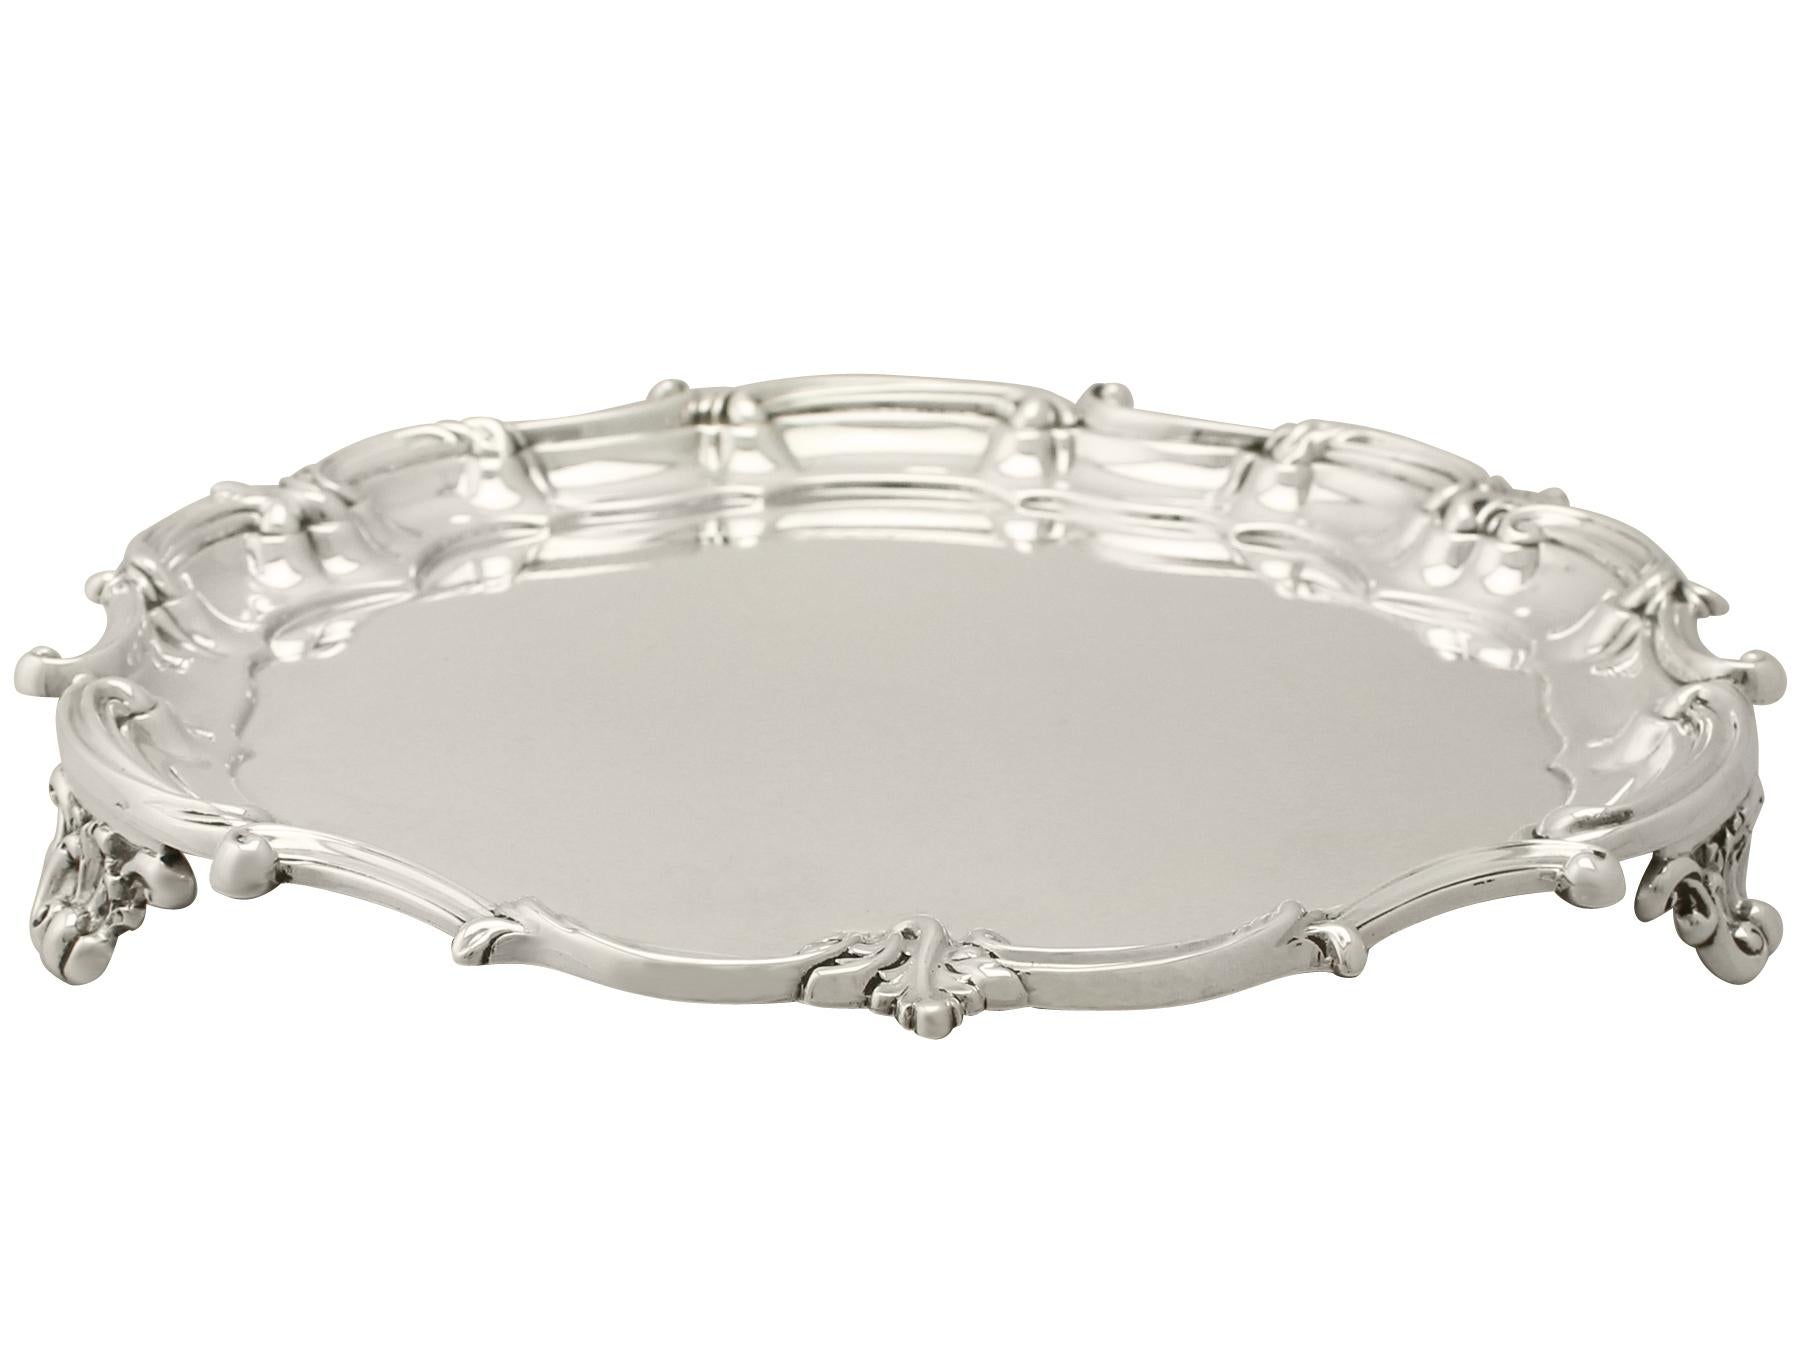 An exceptional, fine and impressive antique George V English sterling silver salver, an addition to our silver dining collection.

This exceptional antique George V English sterling silver salver has a circular shaped form onto three feet.

The